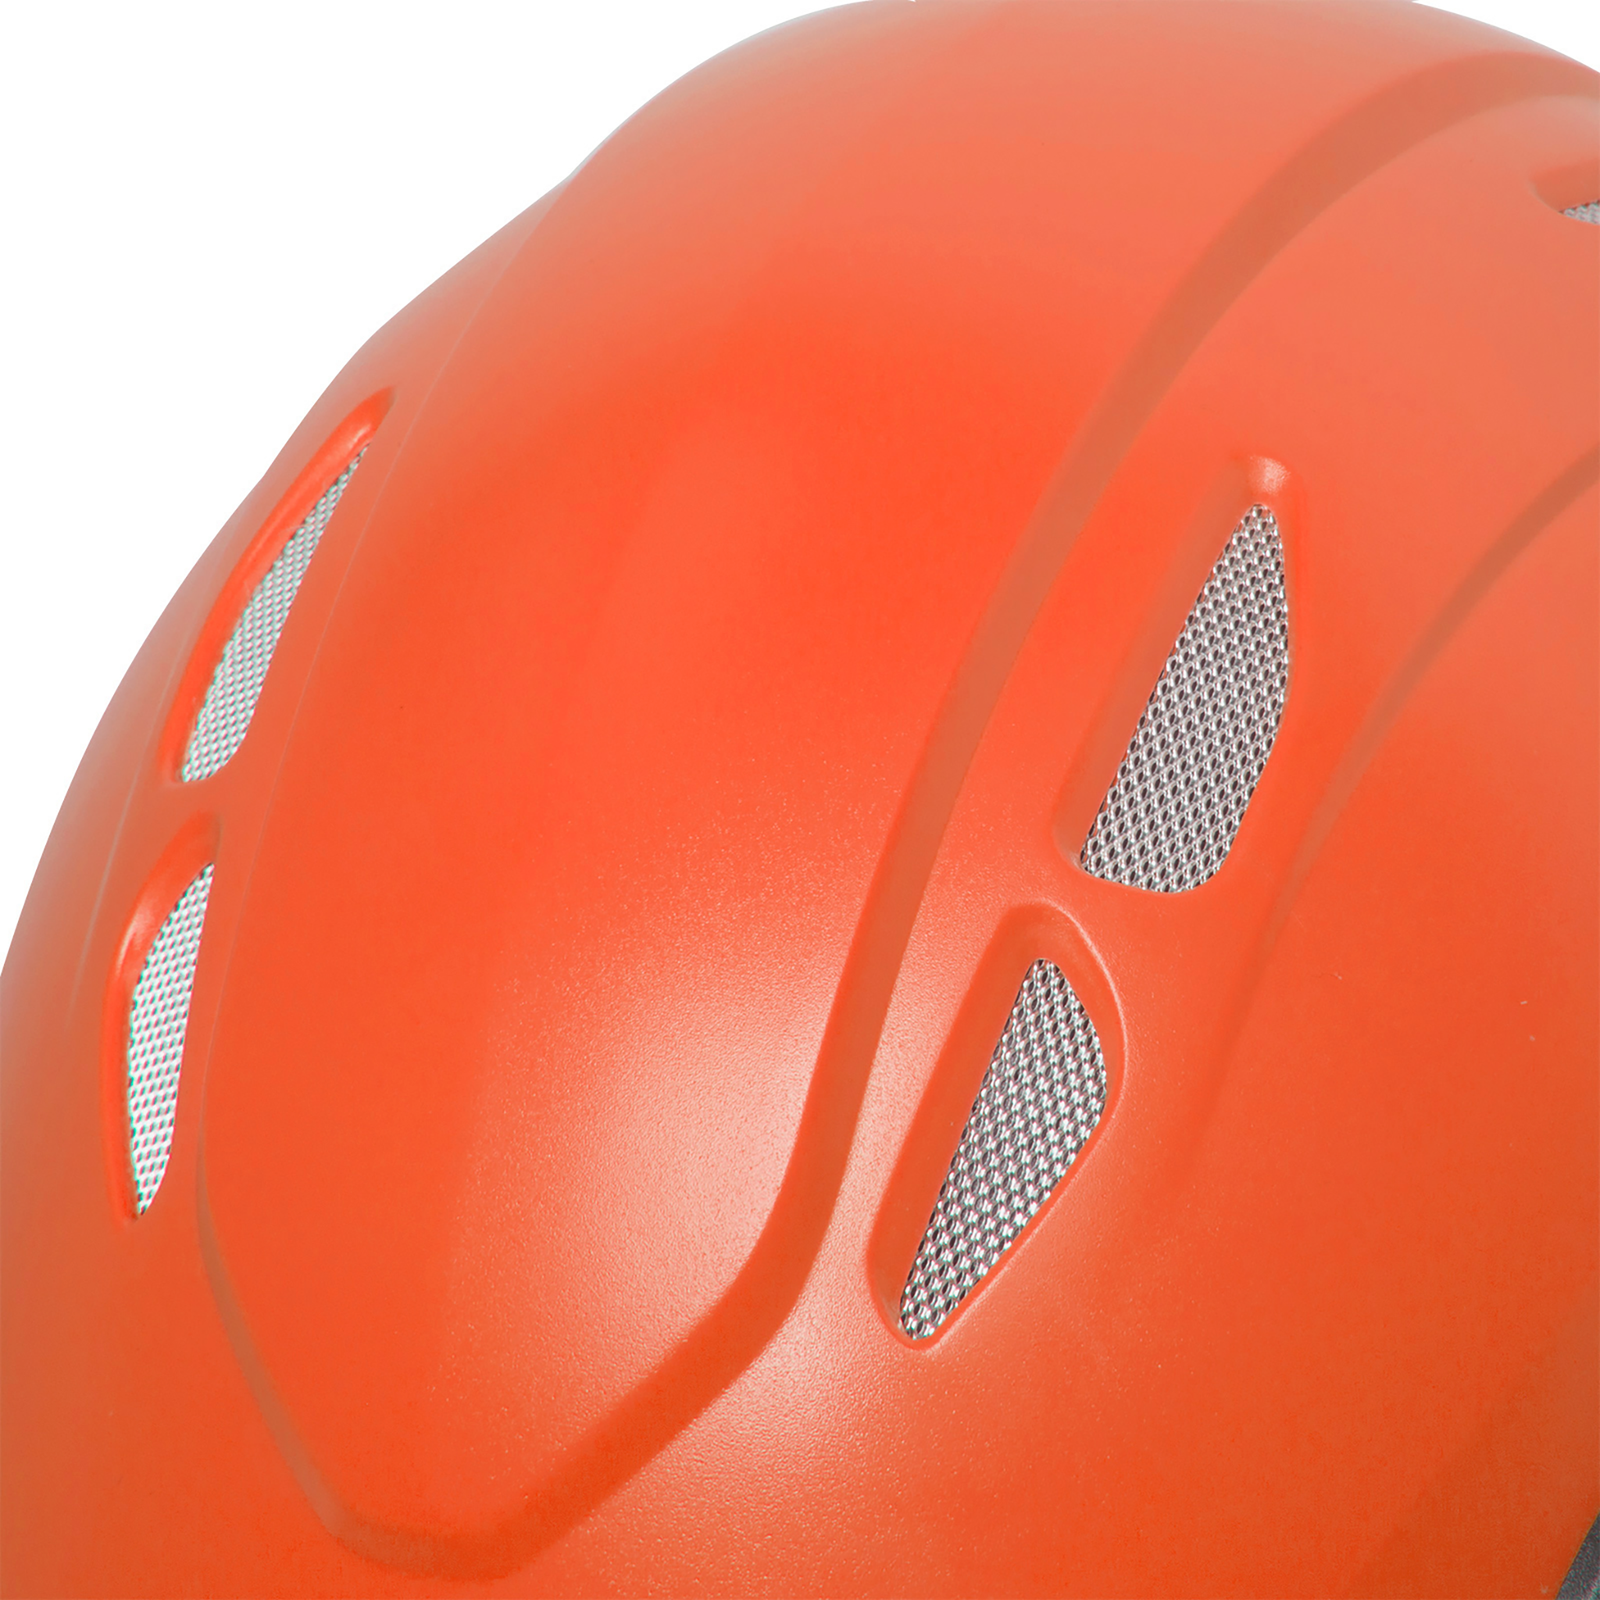 Close up to show the 4 anti-intrusion grilles of the JORESTECH climbing hat